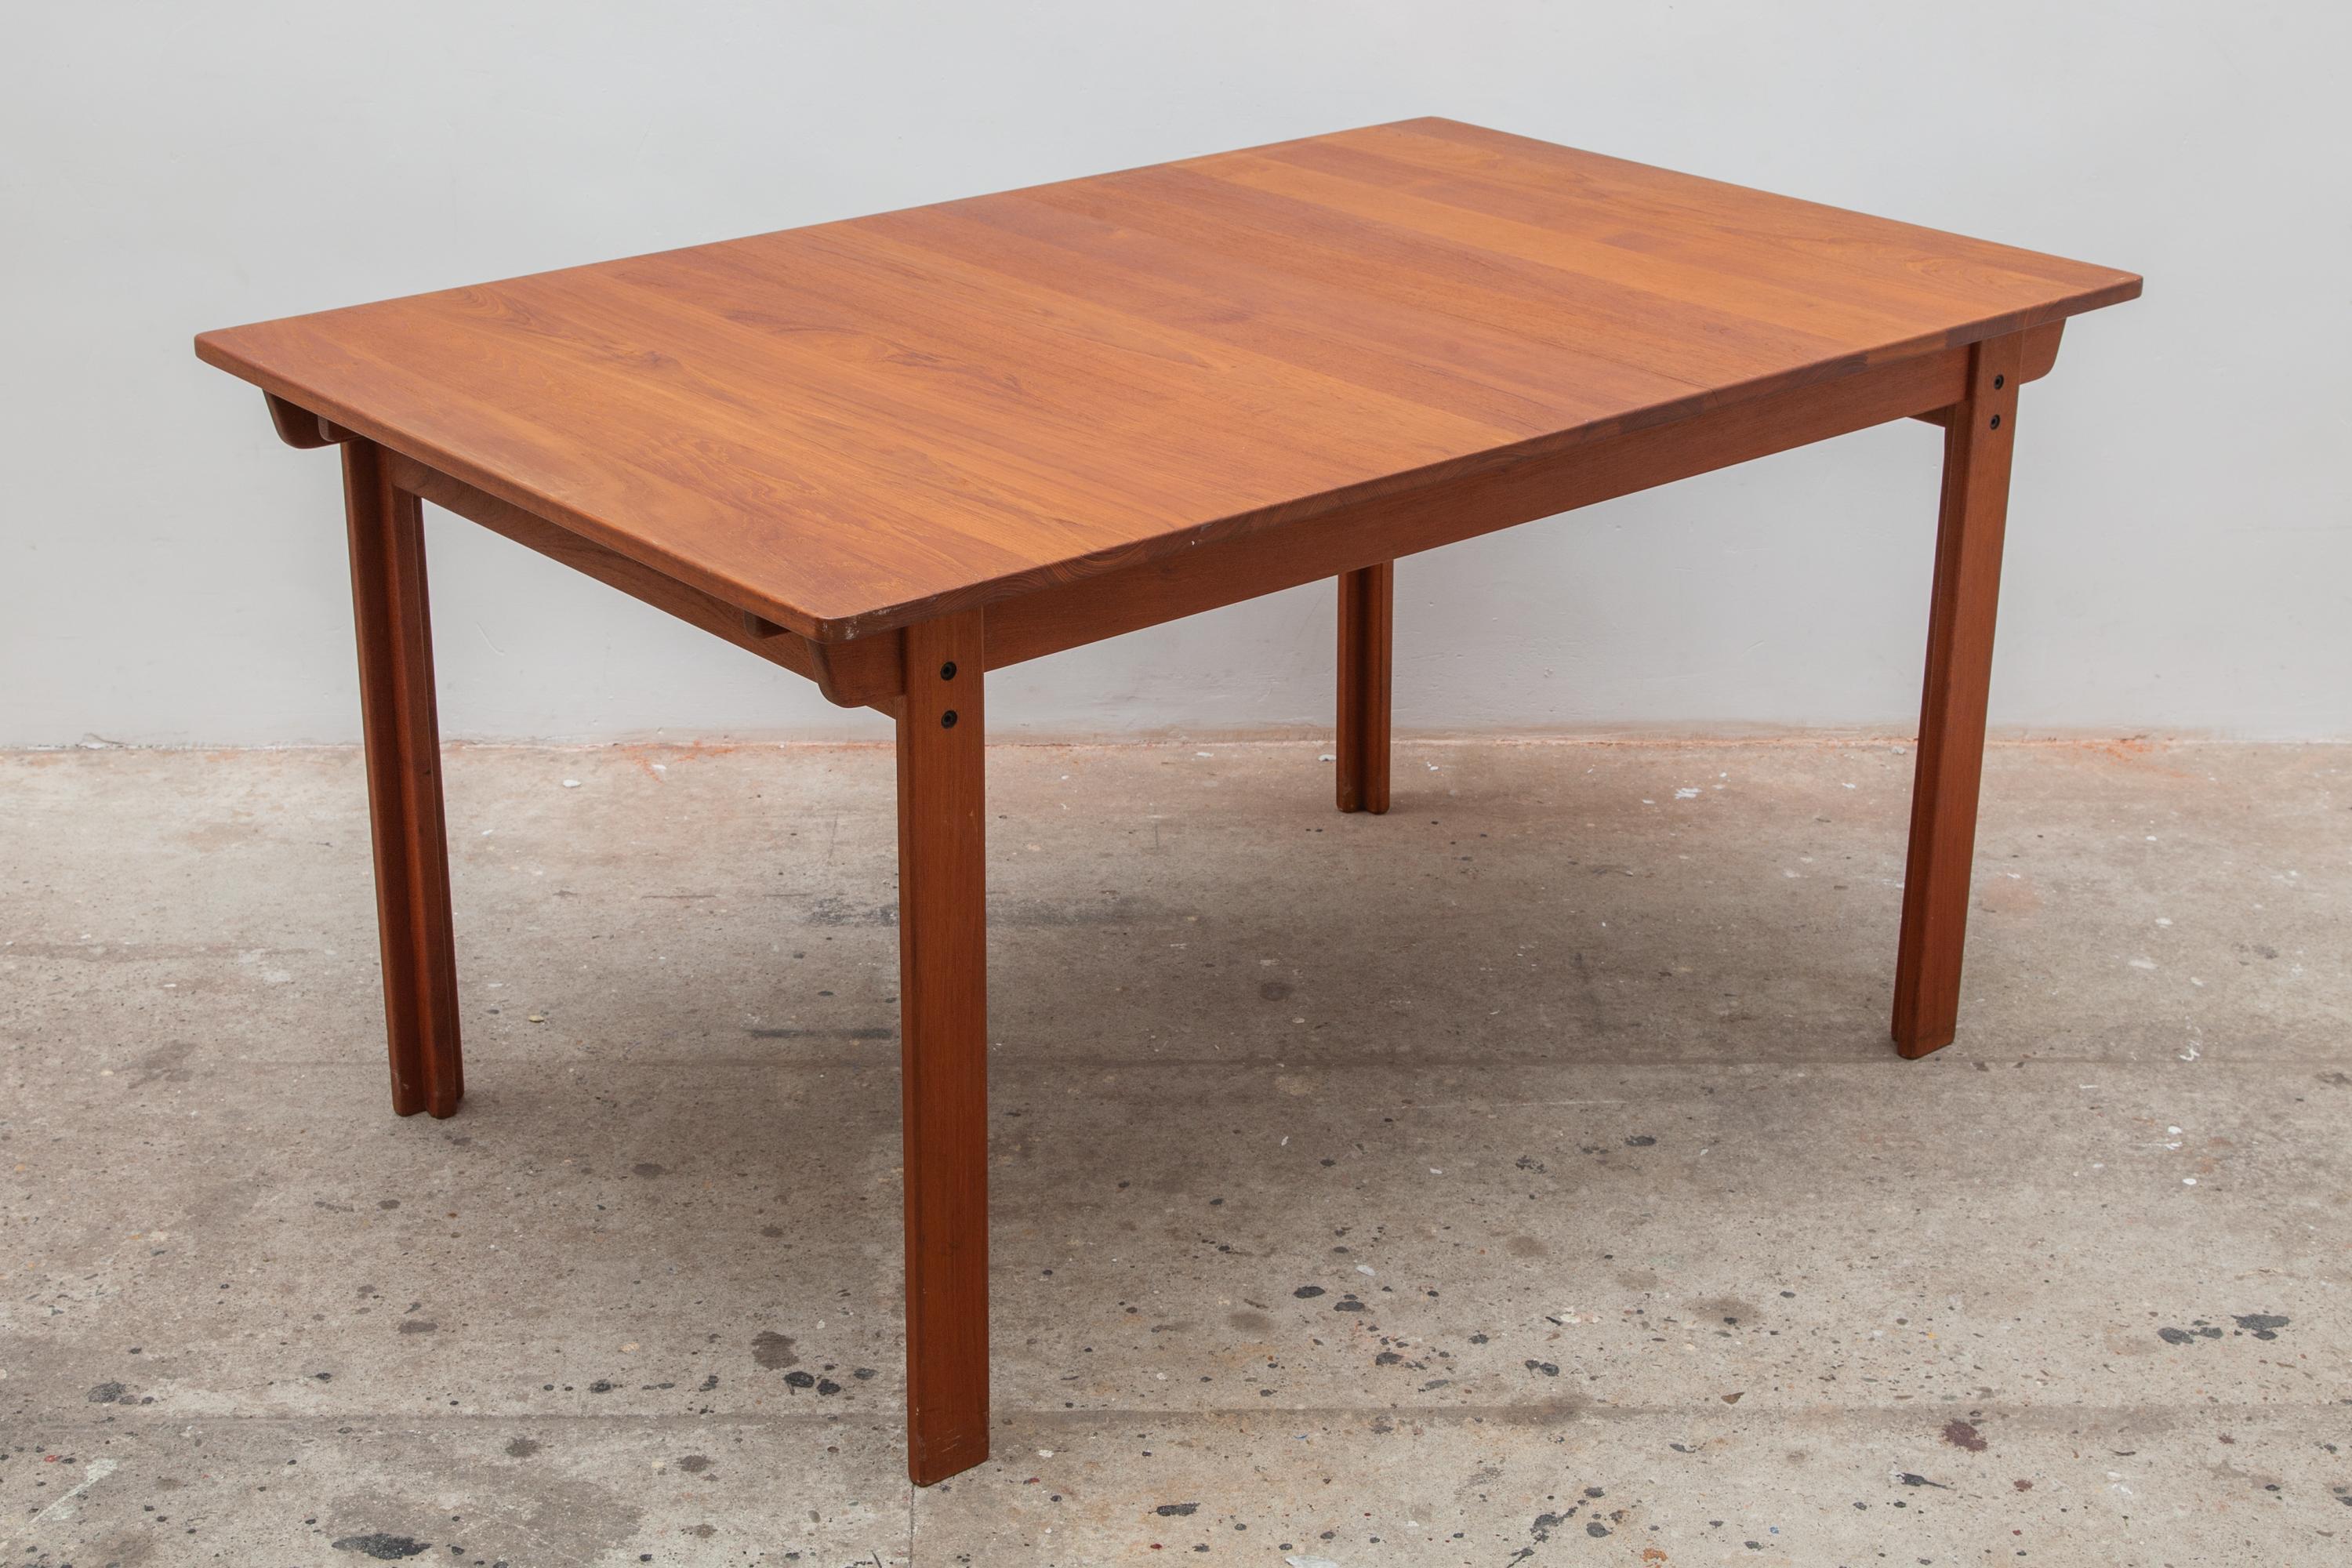 Vintage midcentury dining table made of solid teak in excellent condition.
Can be easily extended with a leaf on each side.

Dimension table: 90 W x 72.5 H x 141 D cm,2 leafs: 90 W x 50 D cm.Total length 241 cm.